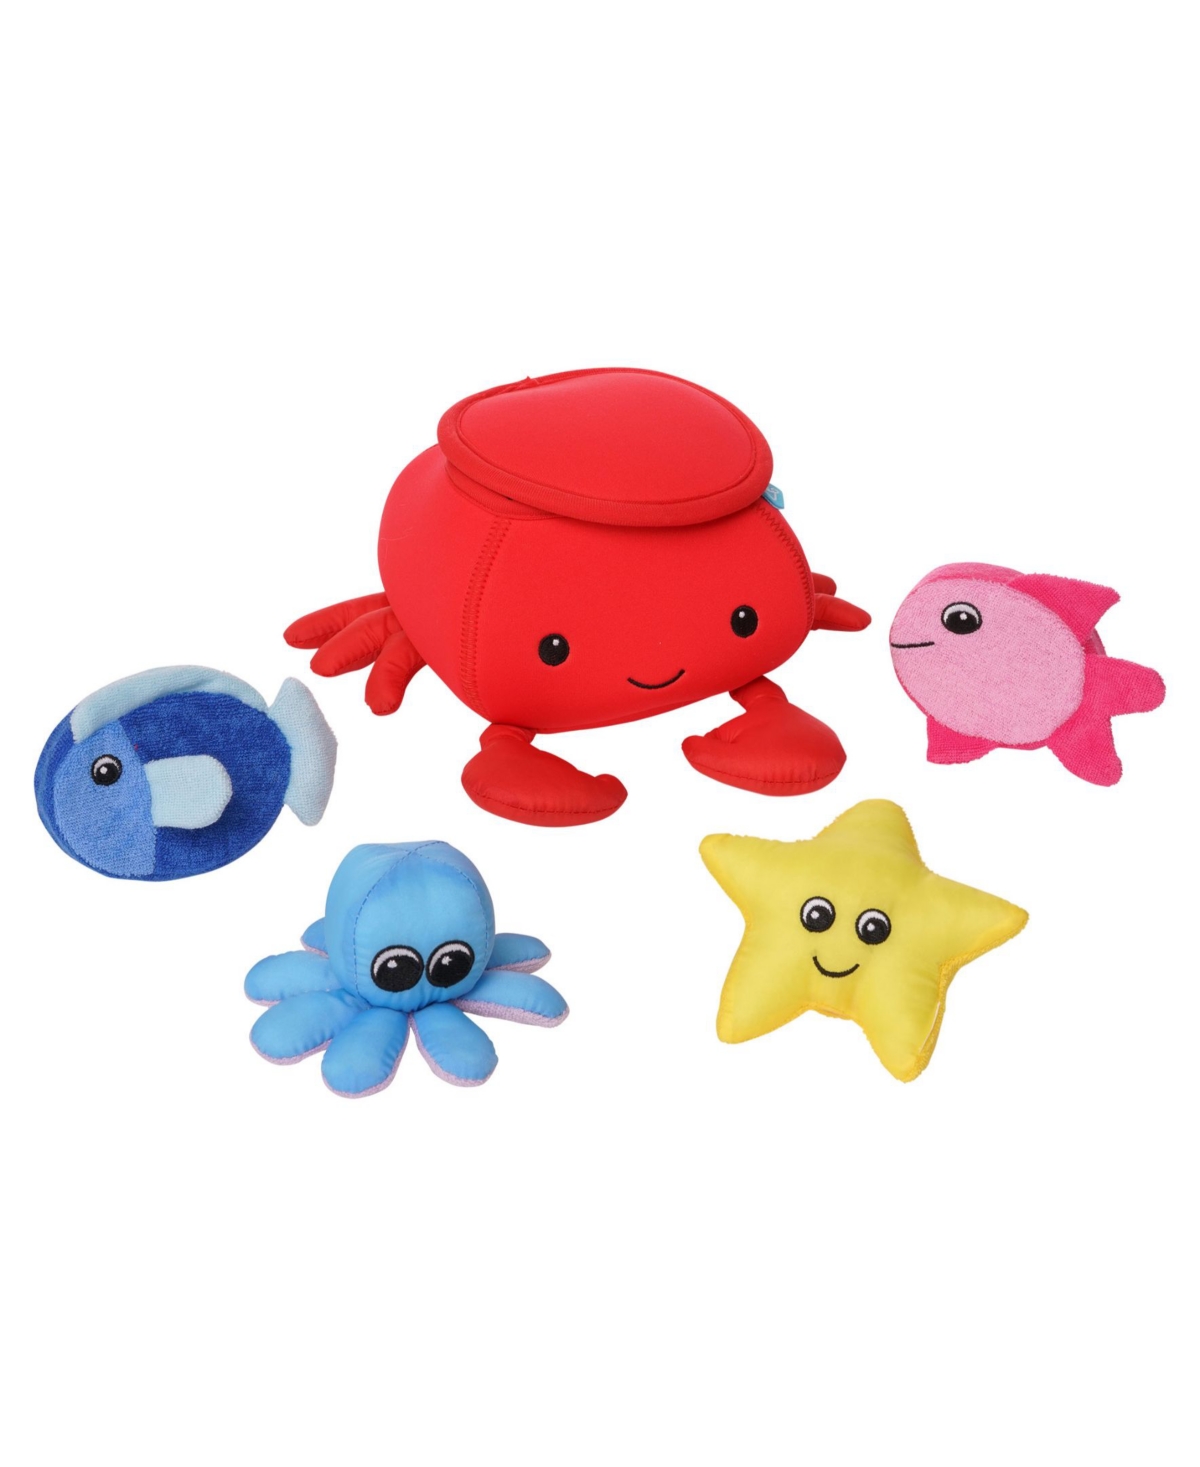 Shop Manhattan Toy Company Neoprene Crab Floating Spill And Fill Bath Toy, 5 Piece In Multi